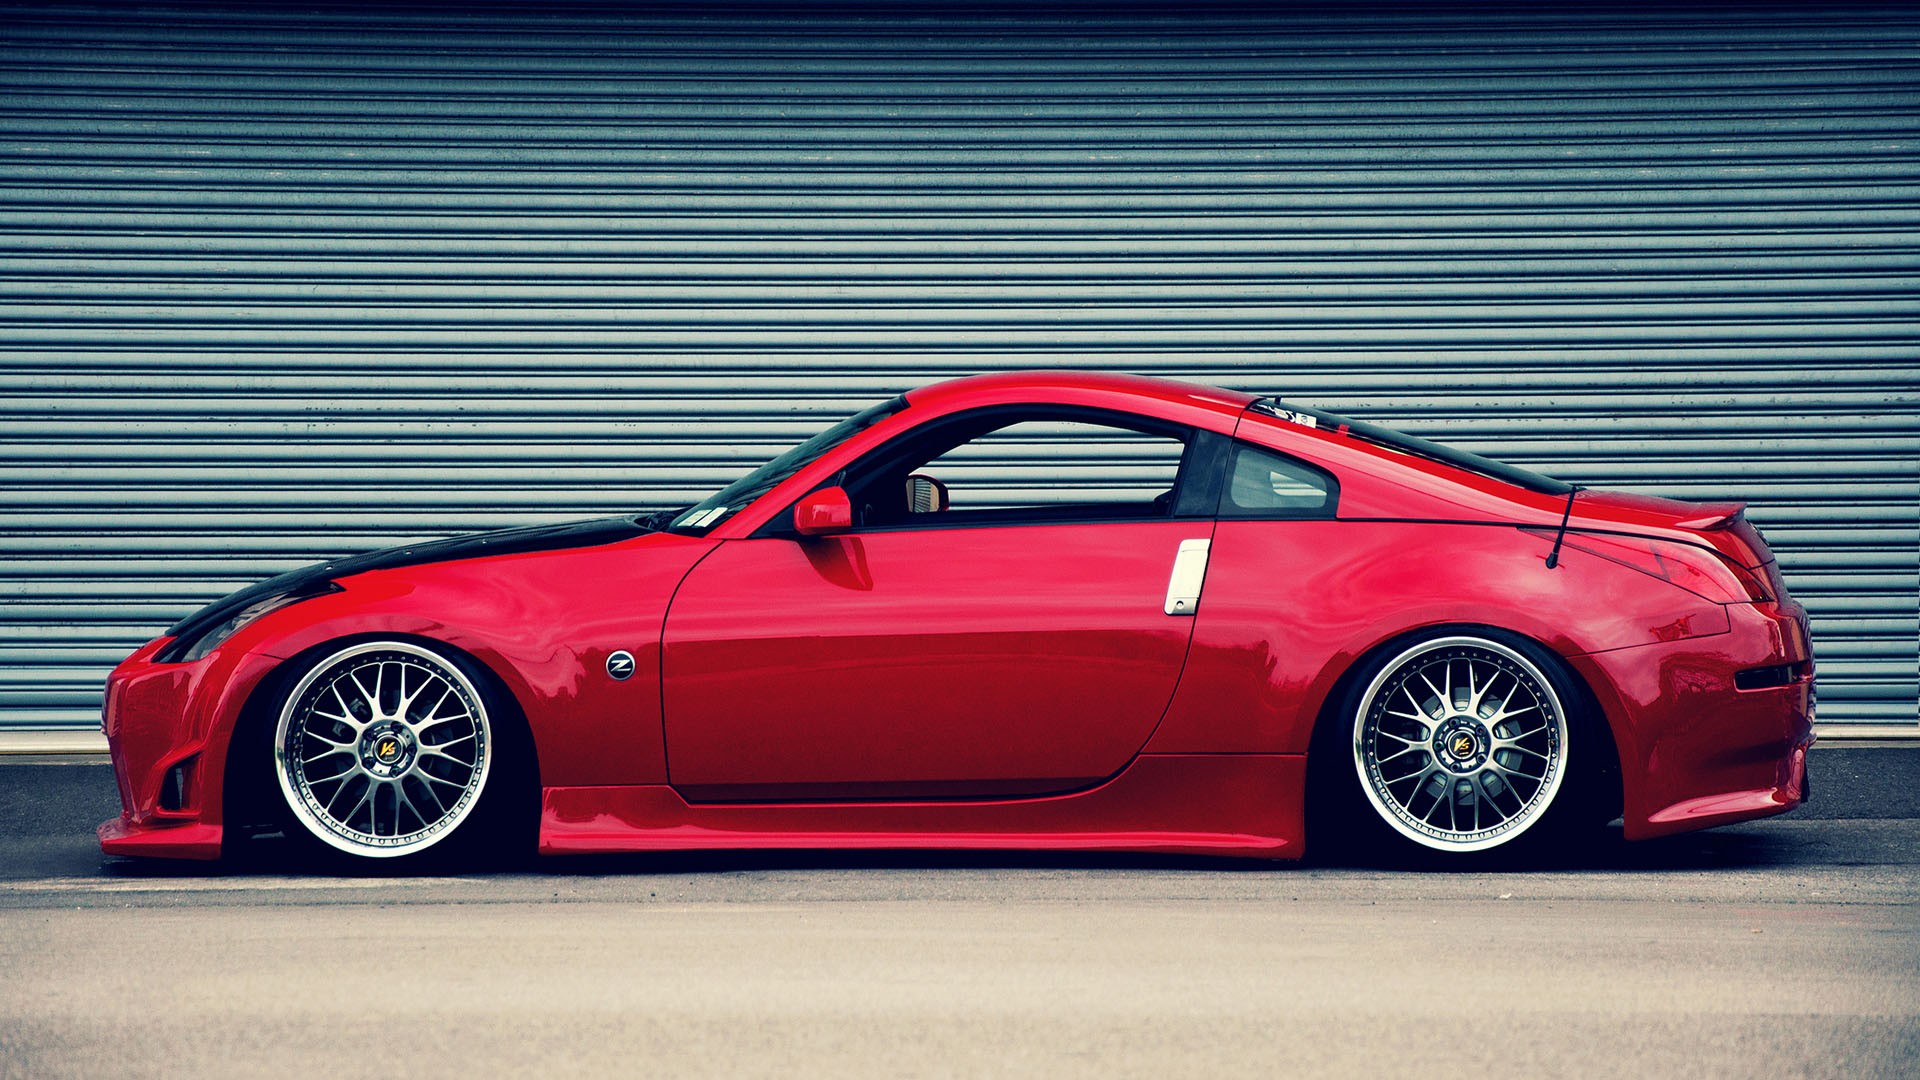 nissan, 350z, Tuning, Stance, Wheels, Chrome, Rims, Candy Wallpaper